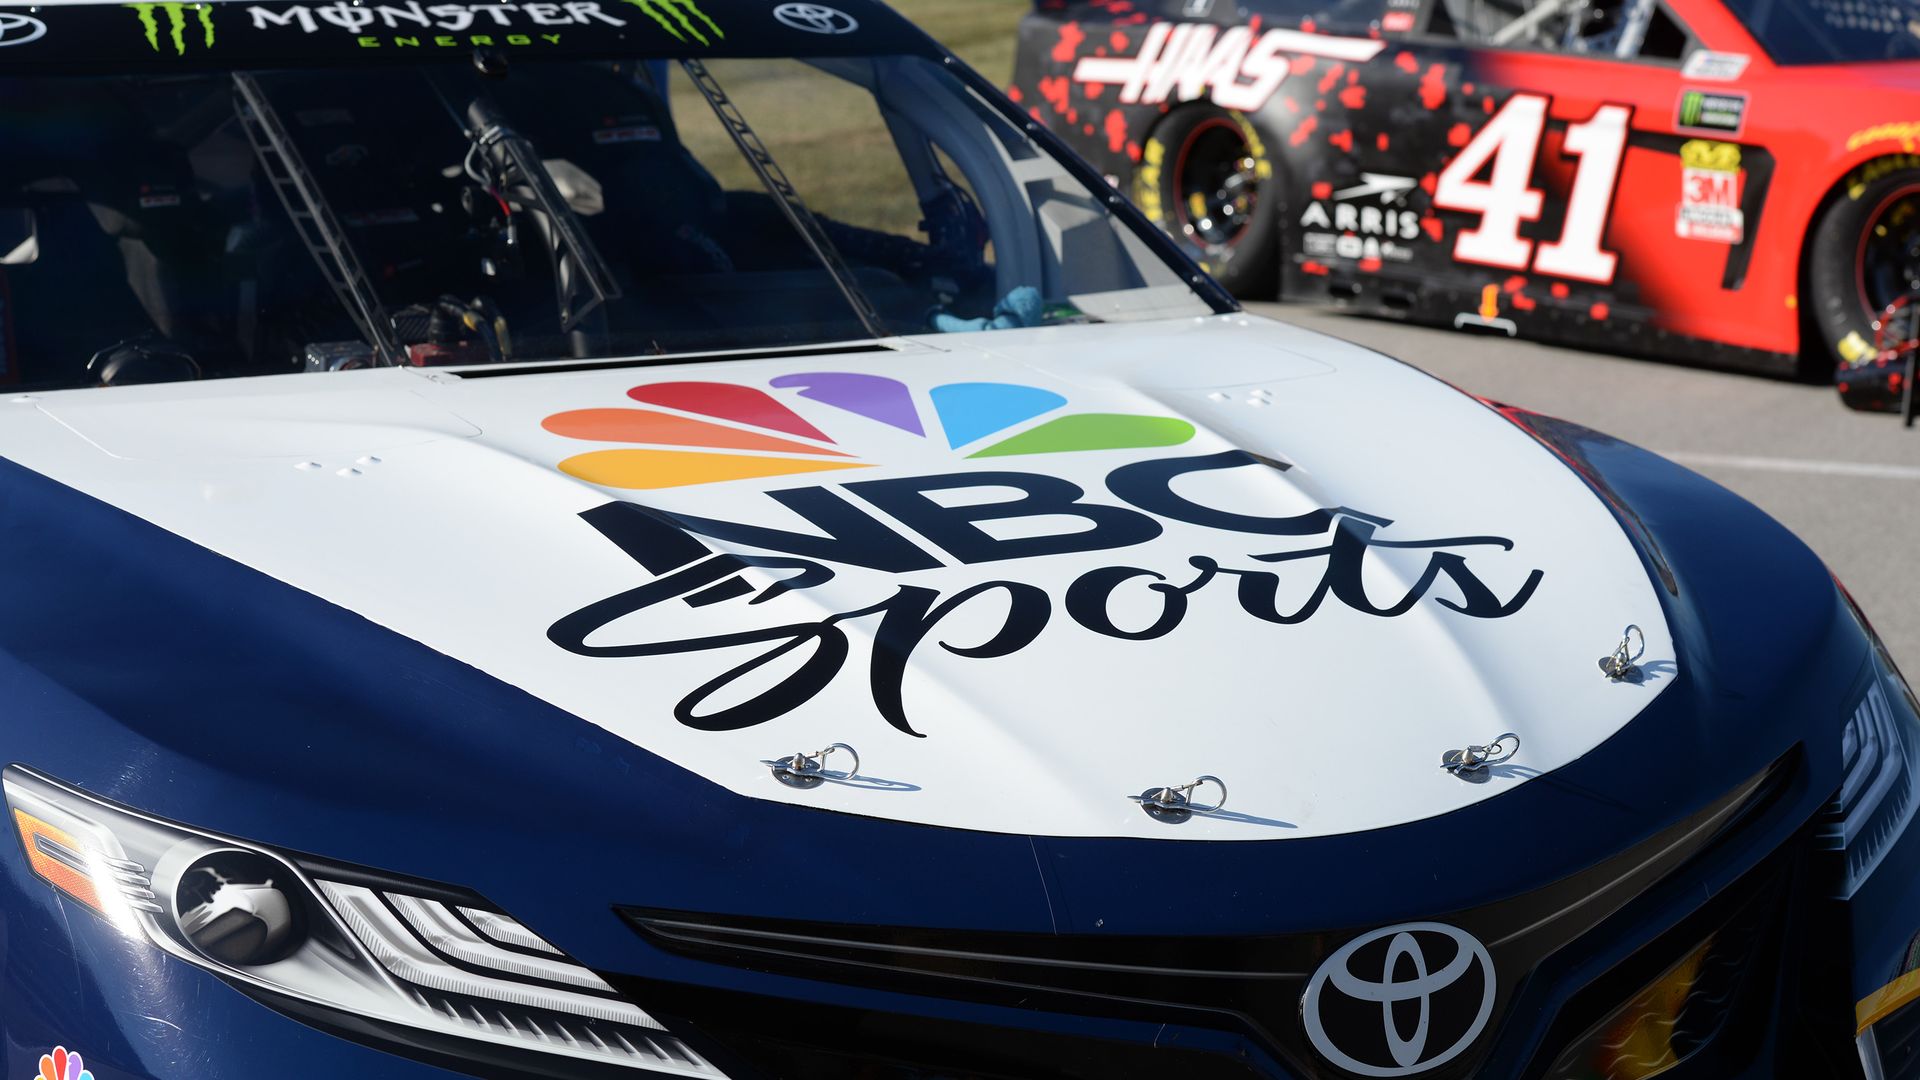 The NBC Sports car sits on pit lane before the start of the Monster Energy NASCAR Cup Series Quaker State 400 presented by Walmart on July 13, 2019, at Kentucky Speedway in Sparta, Kentucky.